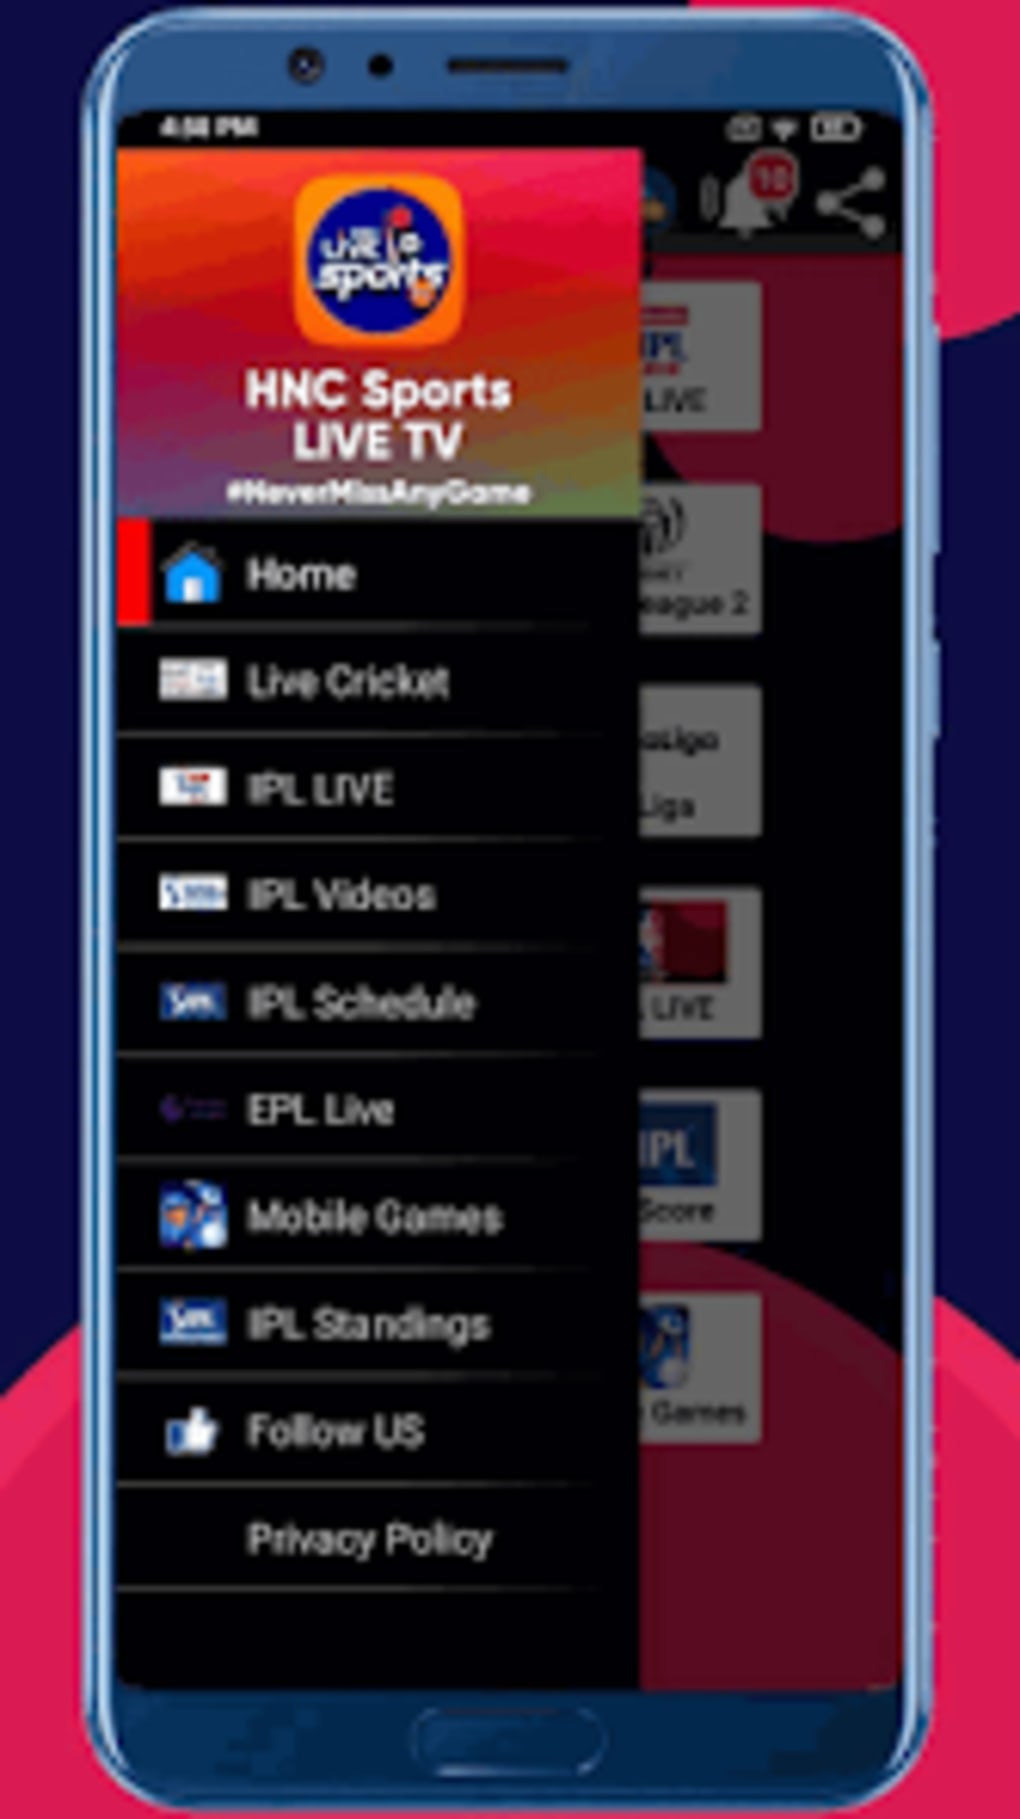 HNC SPORTS LIVE TV for Android